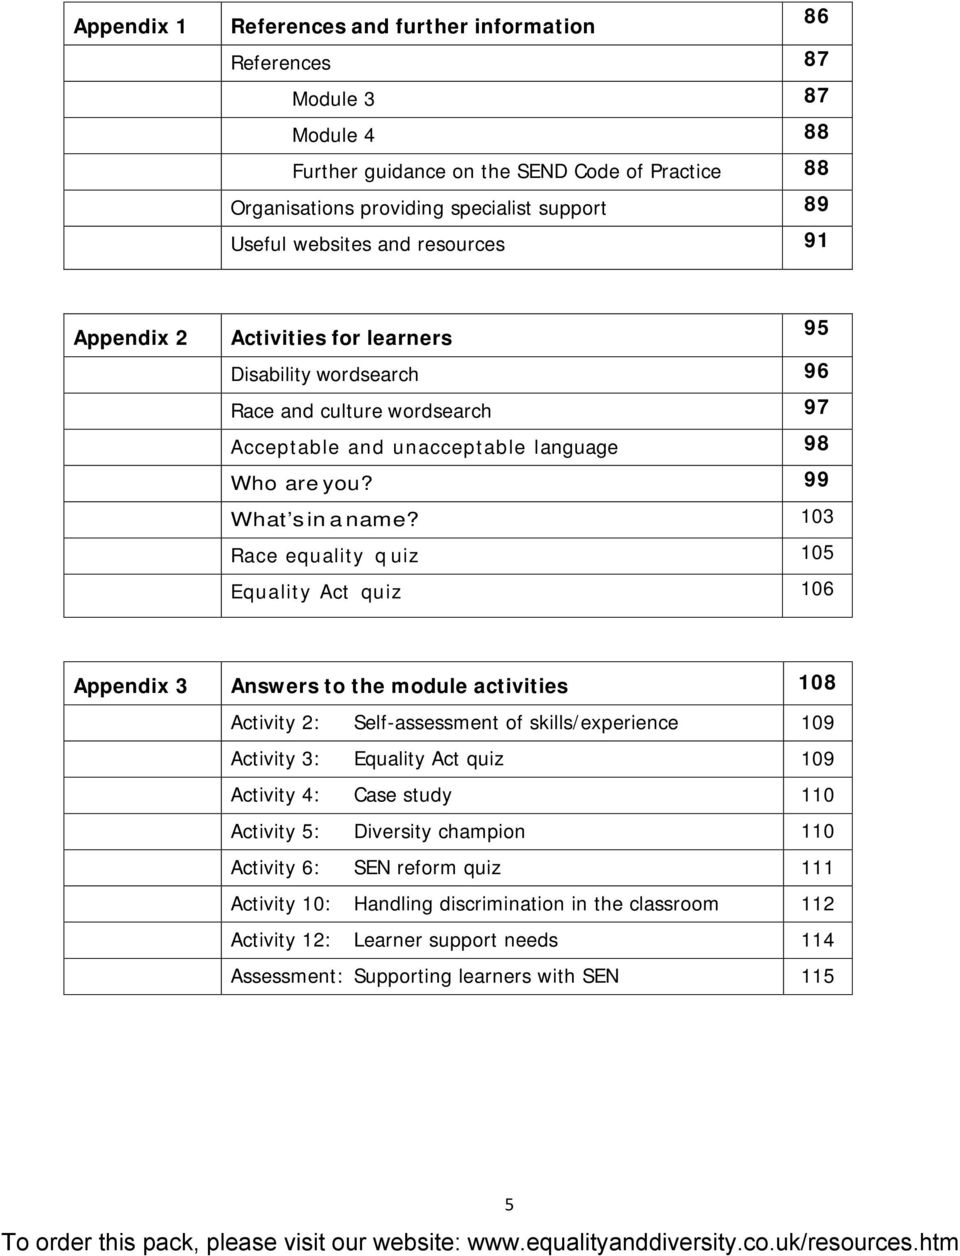 103 Race equality q uiz 105 Equality Act quiz 106 Appendix 3 Answers to the module activities 108 Activity 2: Self-assessment of skills/experience 109 Activity 3: Equality Act quiz 109 Activity 4: